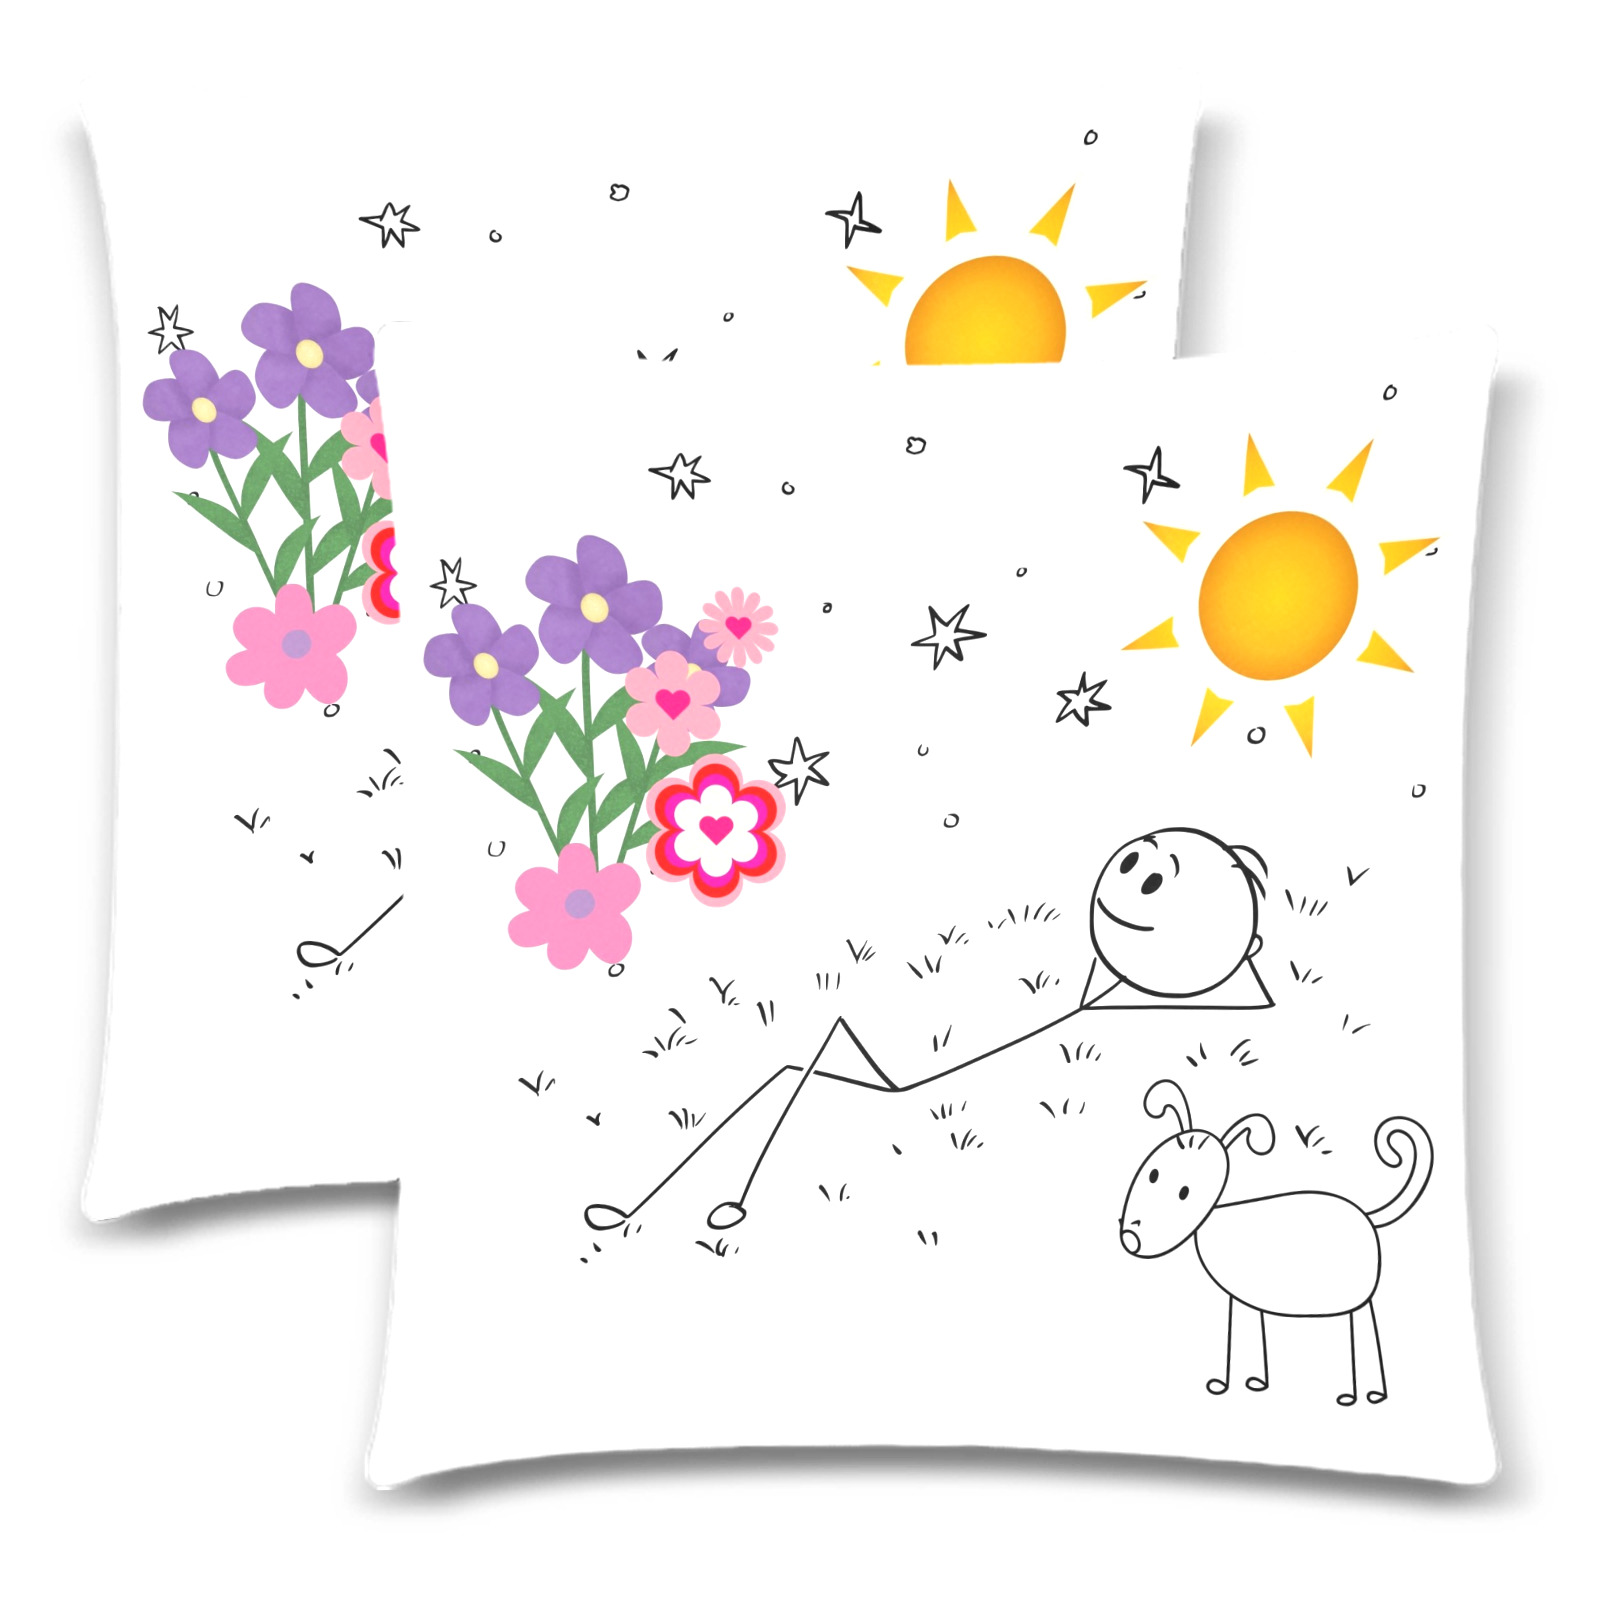 Happy Daze Folk Art Stick Man With Sun and Flowers and Dog Custom Zippered Pillow Cases 18"x 18" (Twin Sides) (Set of 2)